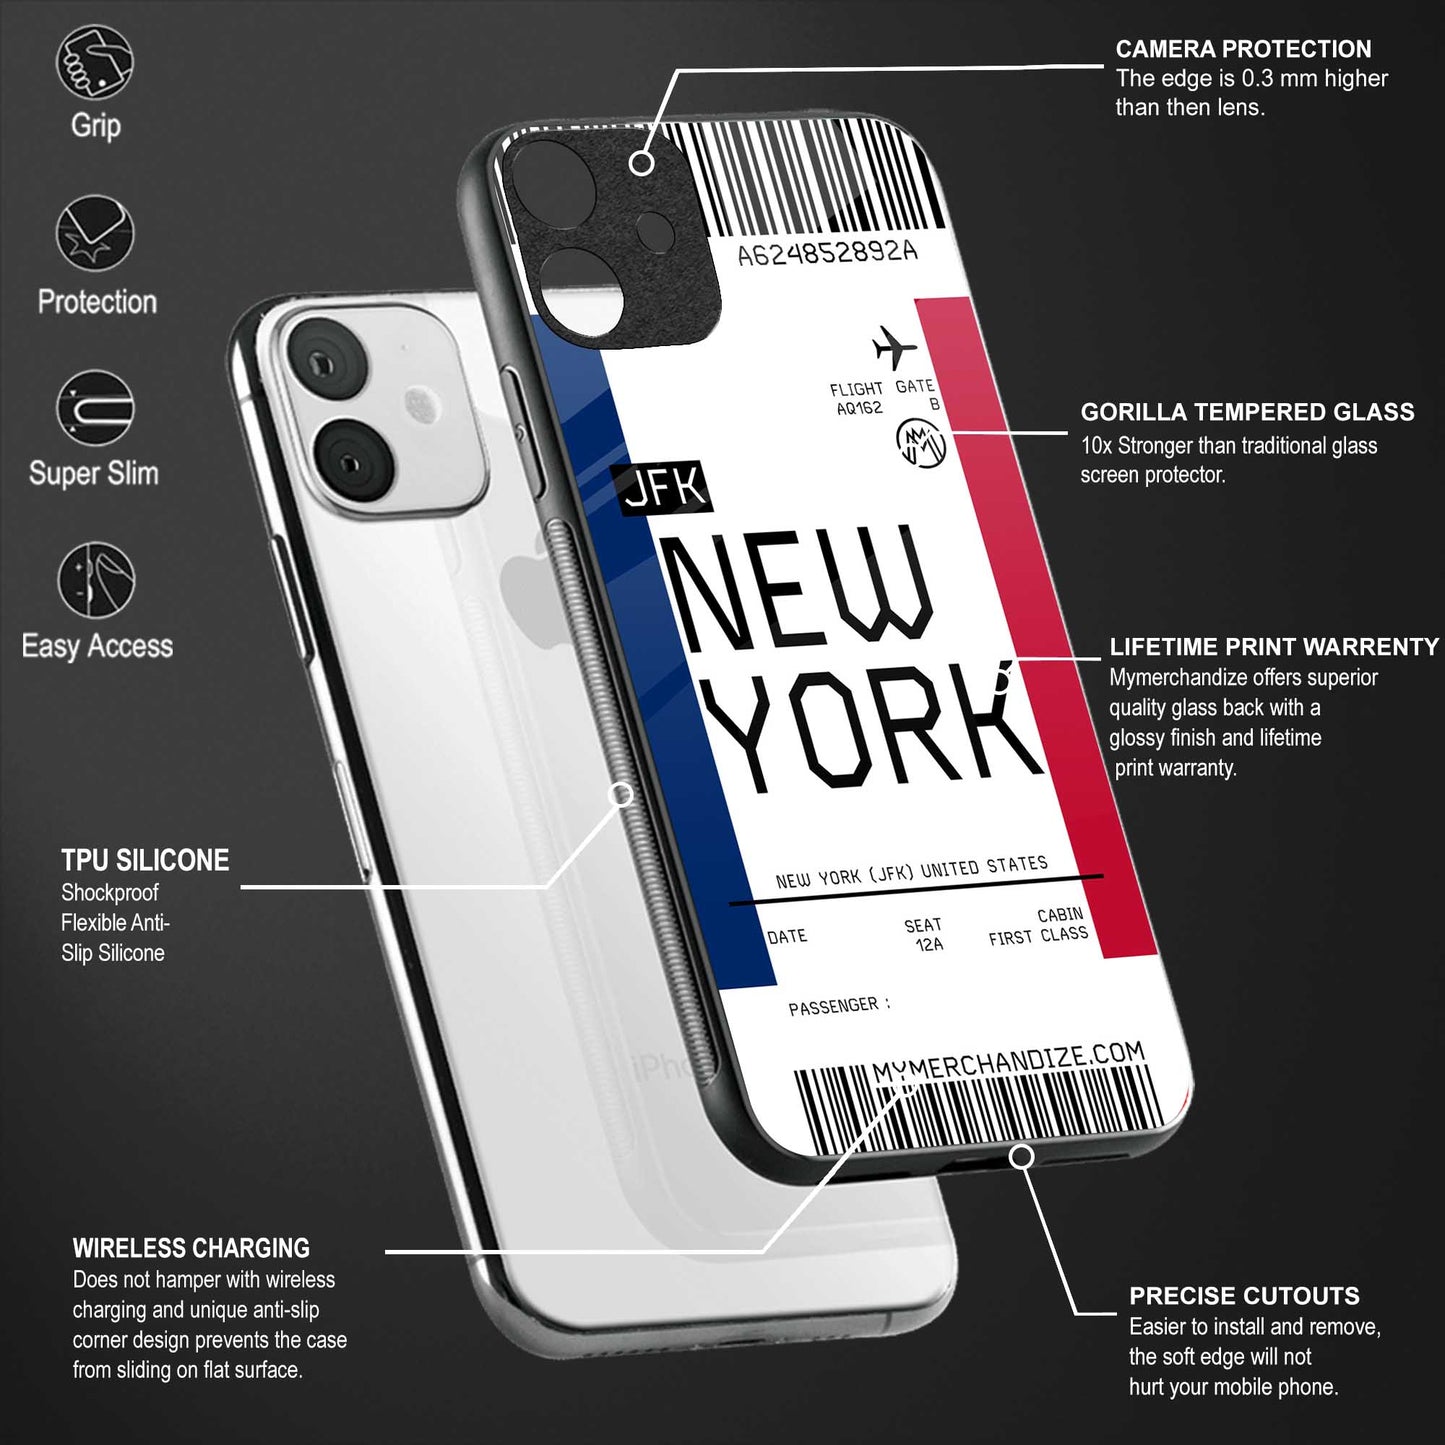 new york boarding pass glass case for iphone x